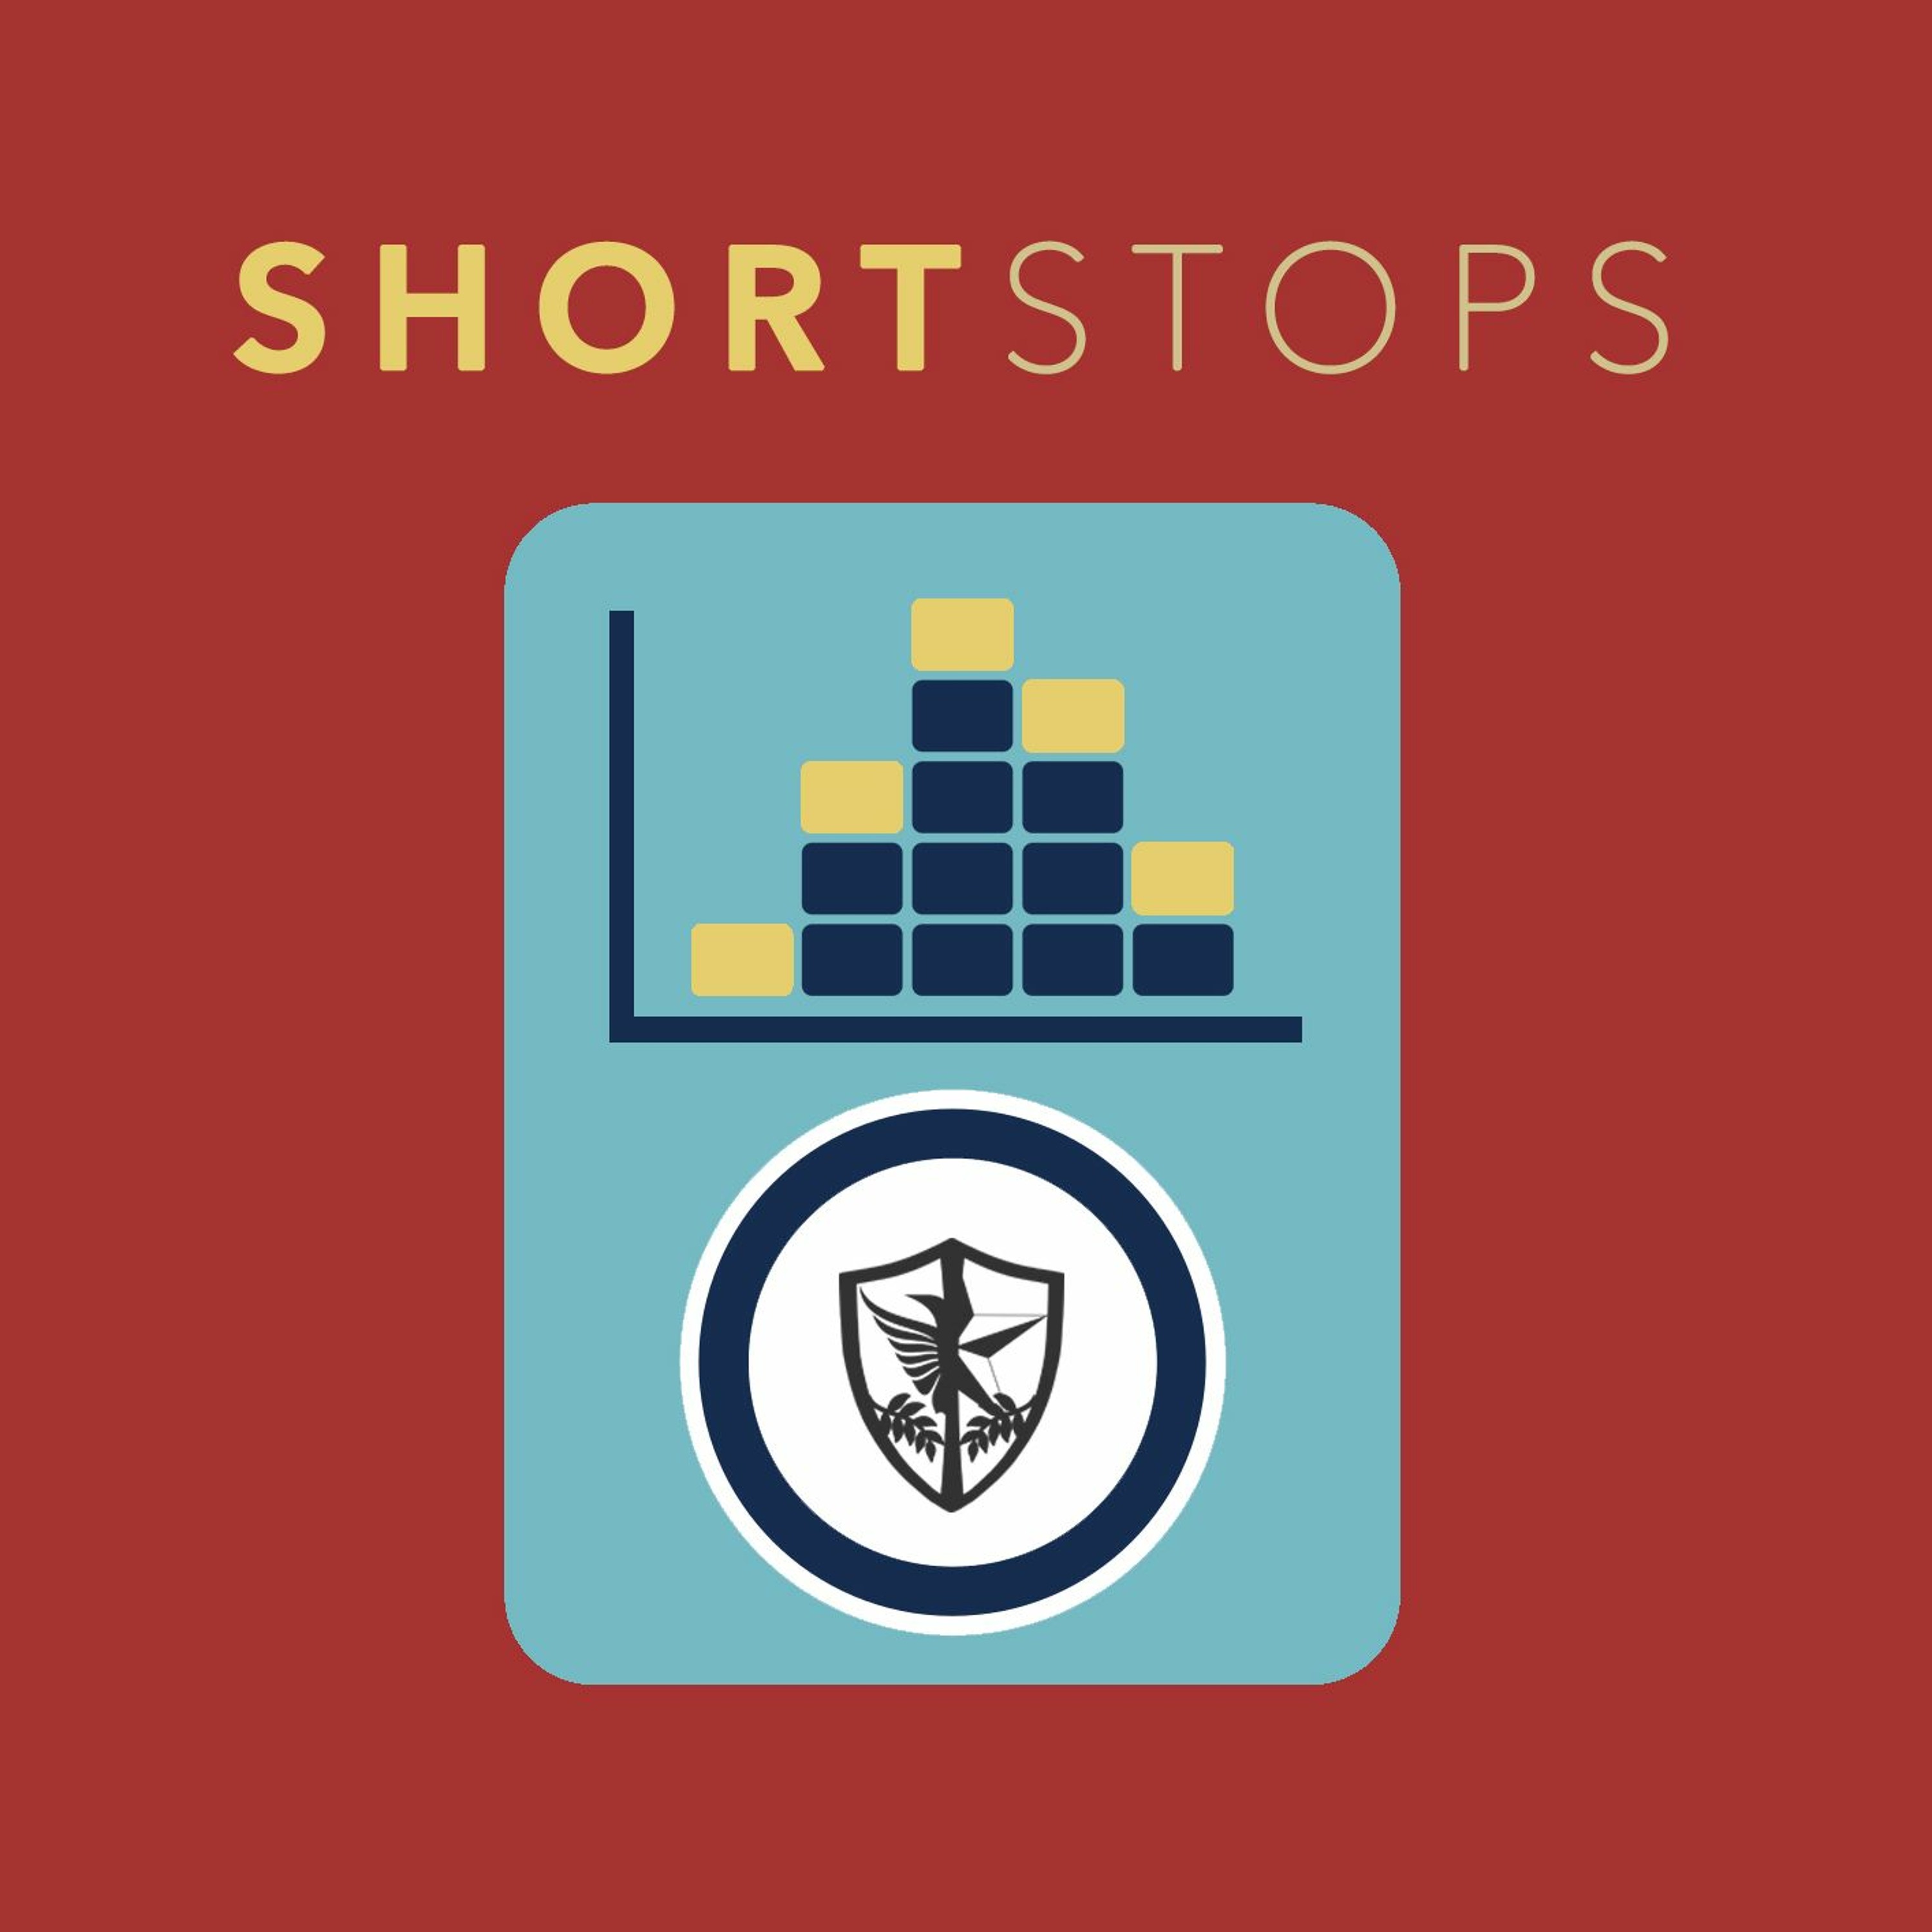 Short Stops - #24: The Art of Selling (Why is it so hard to let go?)